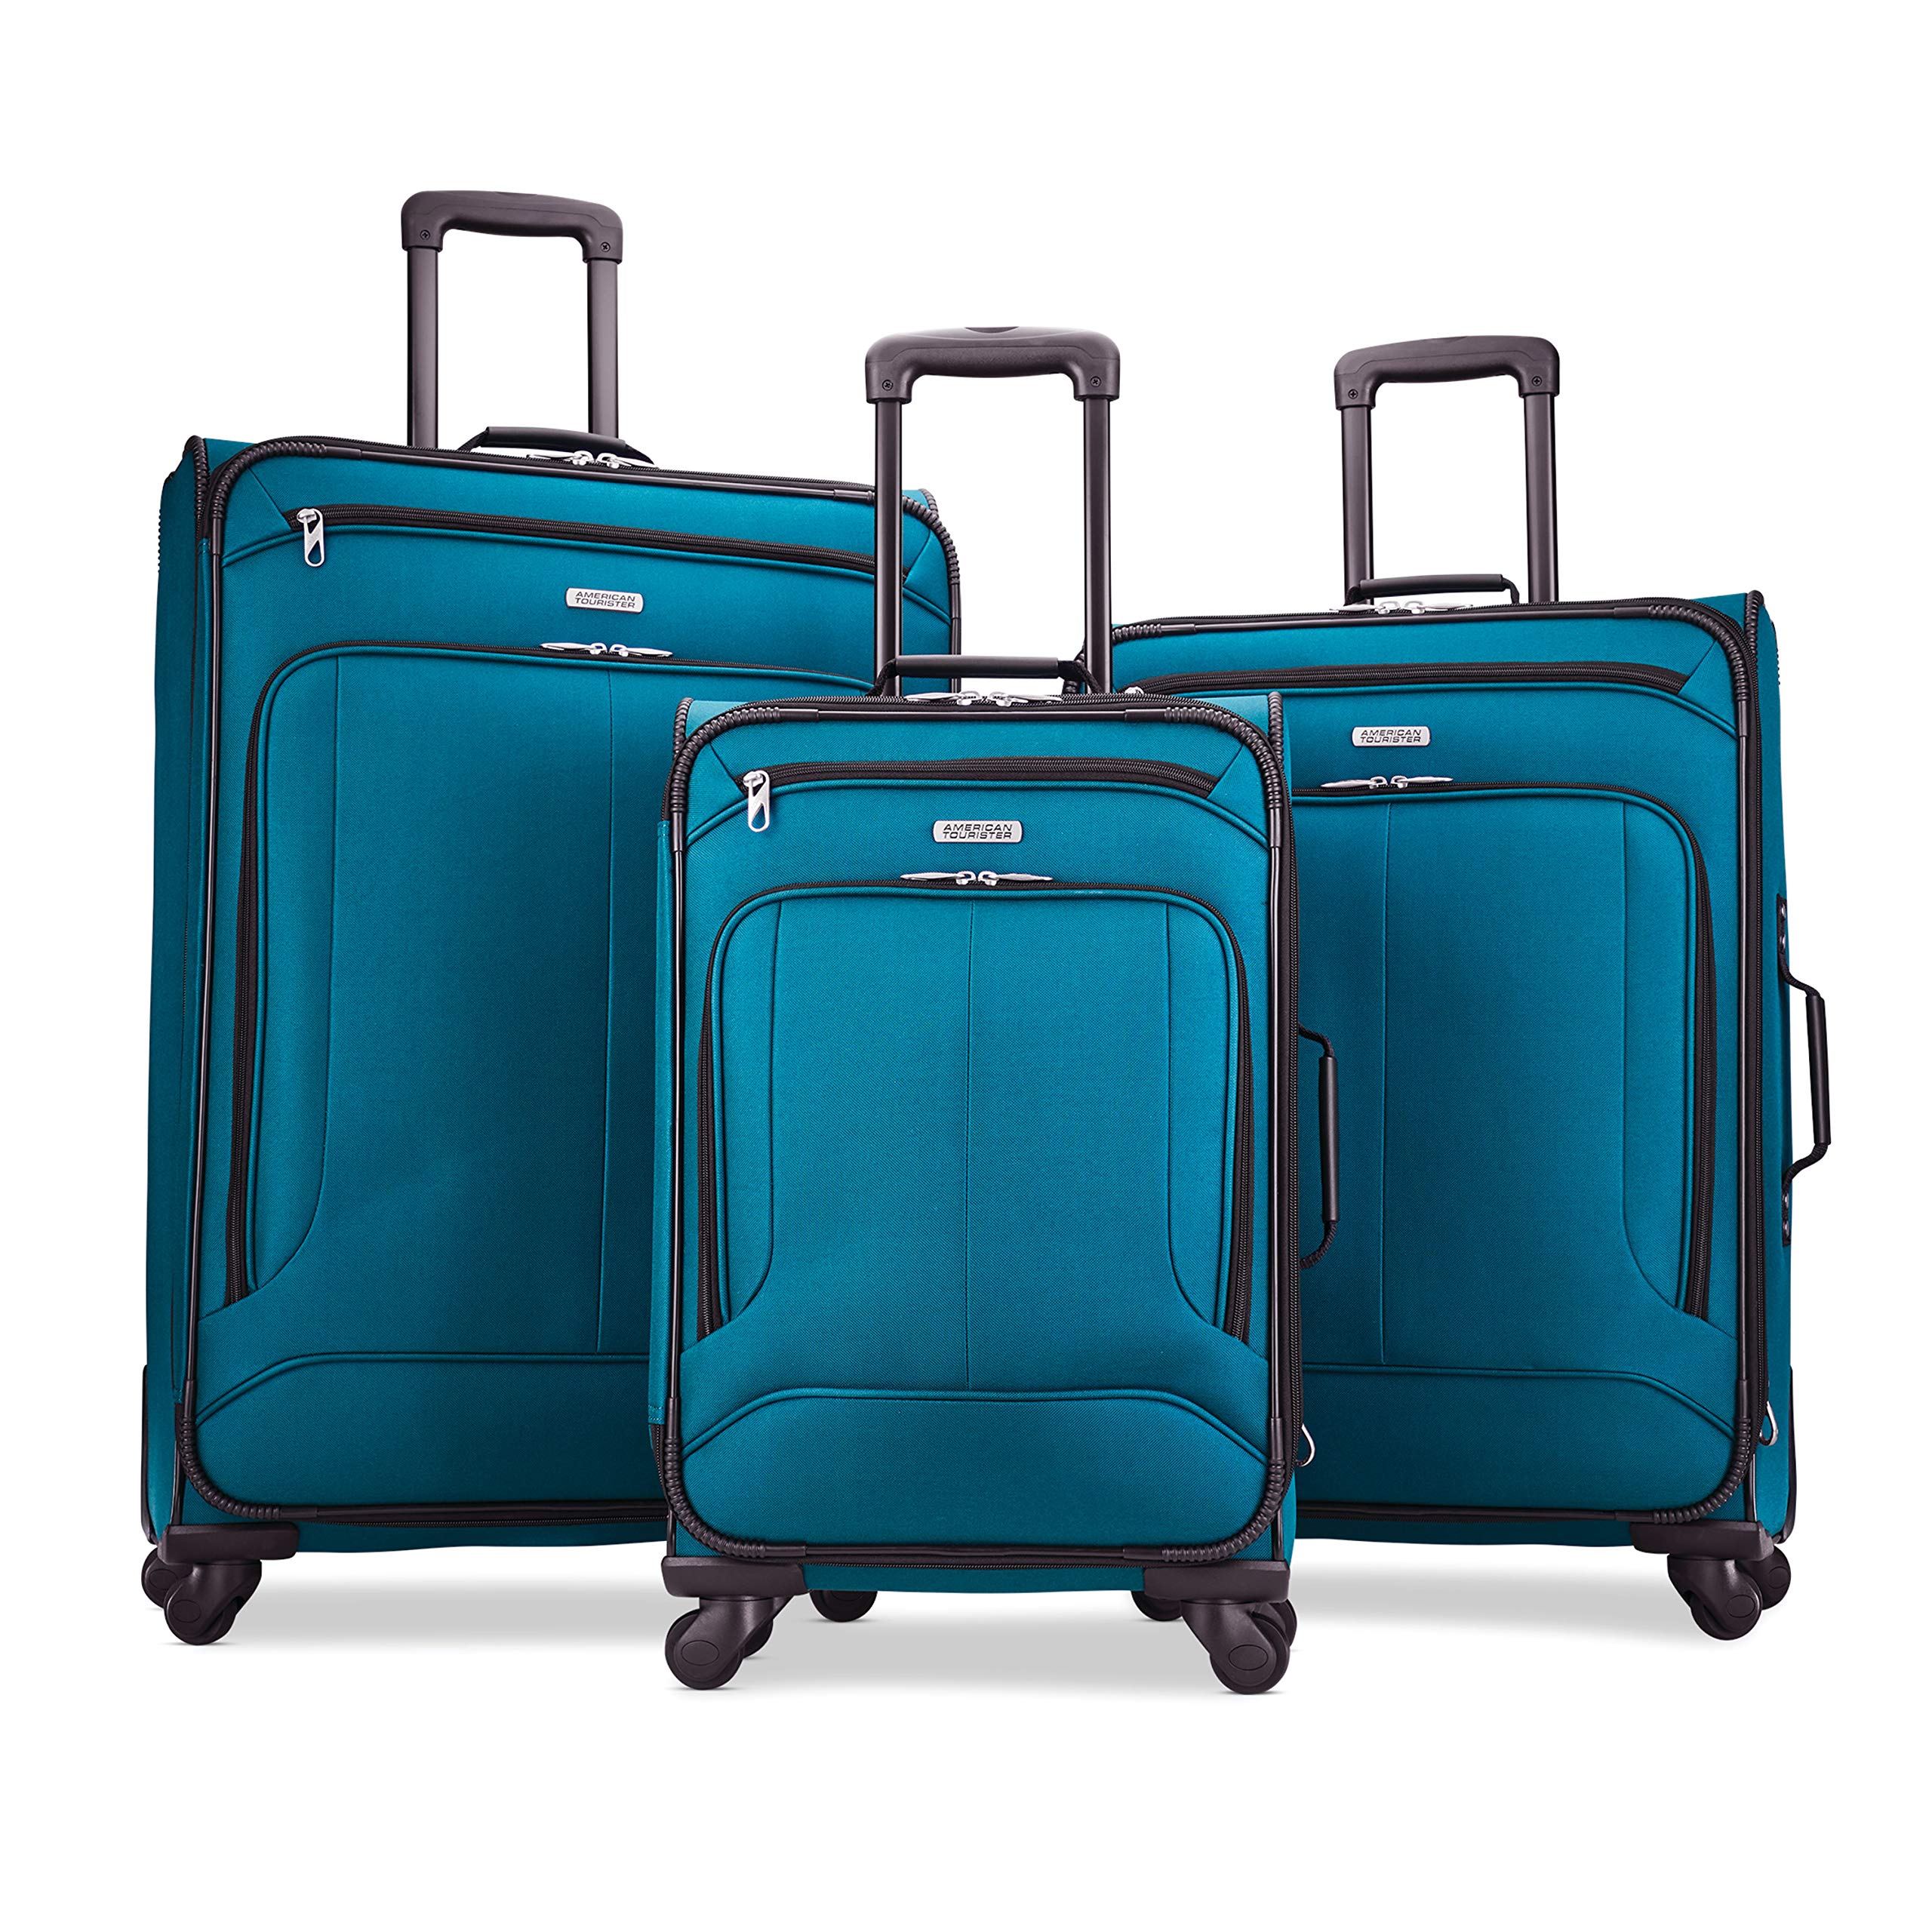 3-Piece American Tourister Pop Max Softside Luggage Set w/ Spinner Wheels (21/25/29, Teal) $135.76 + Free Shipping